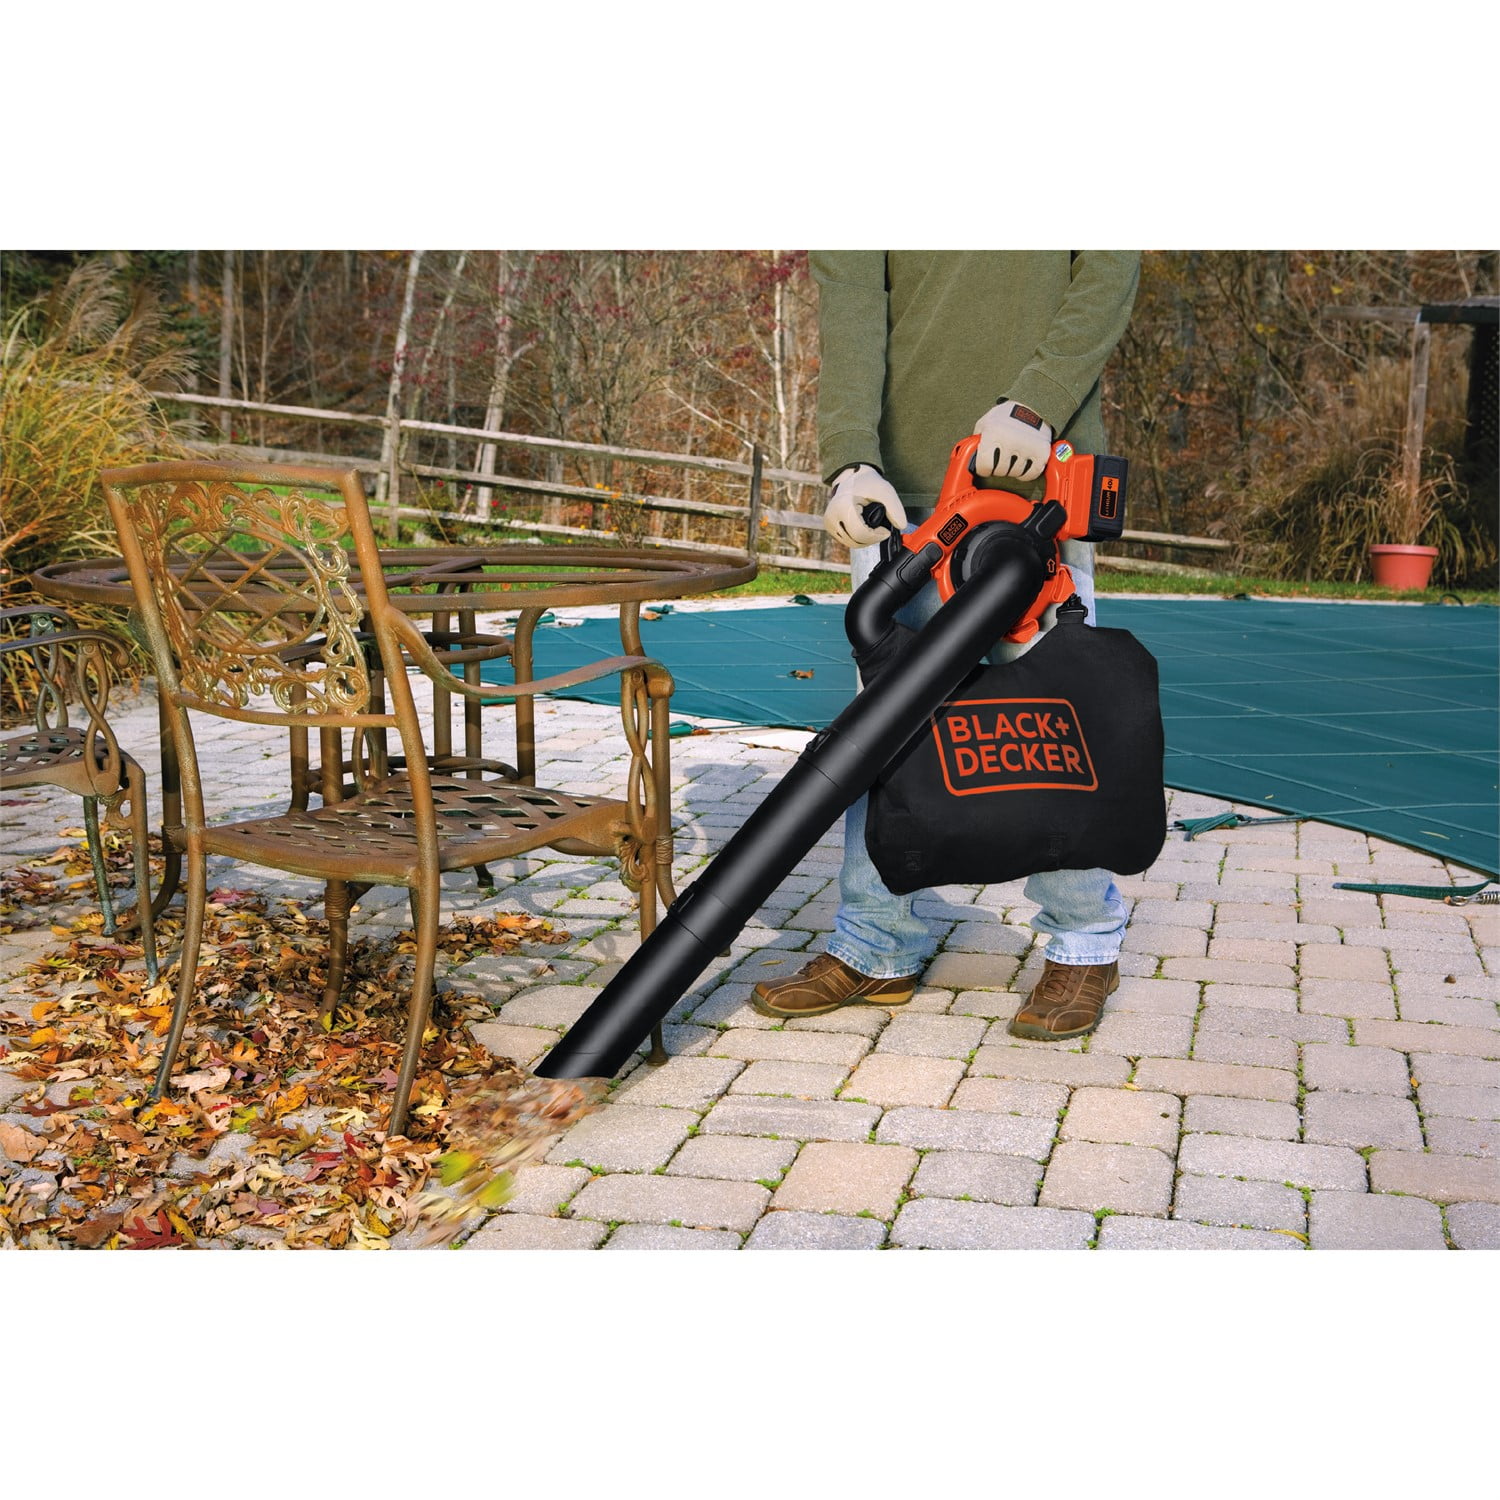 Black and Decker 40V MAX Lithium Sweeper/Vacuum (Bare Tool) LSWV36